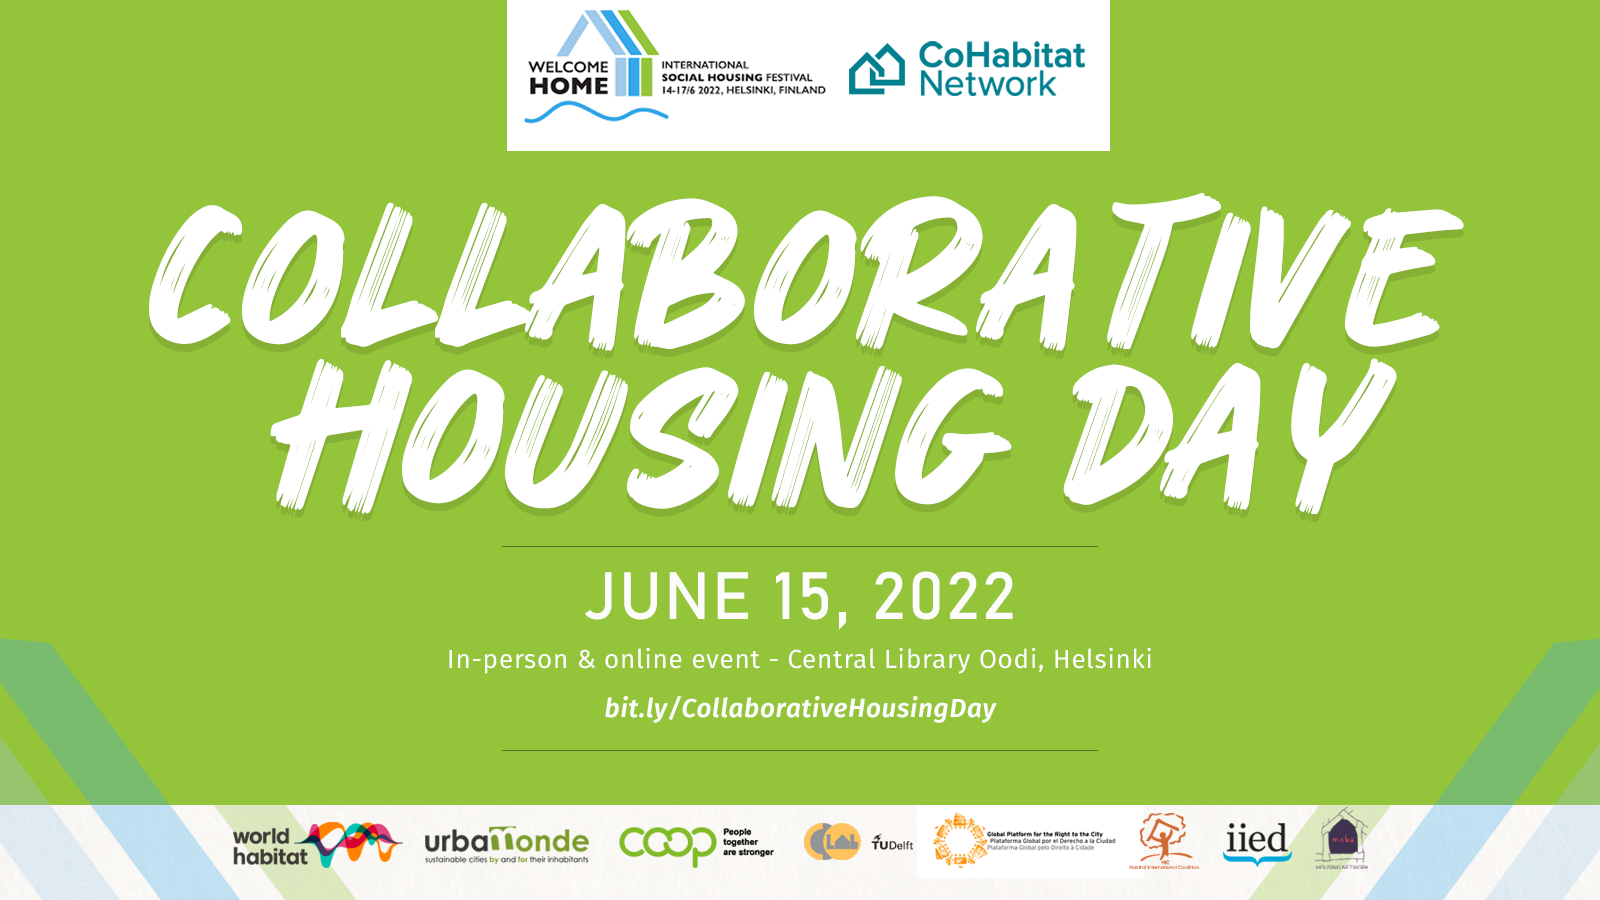 Why are collaborative housing models needed today?